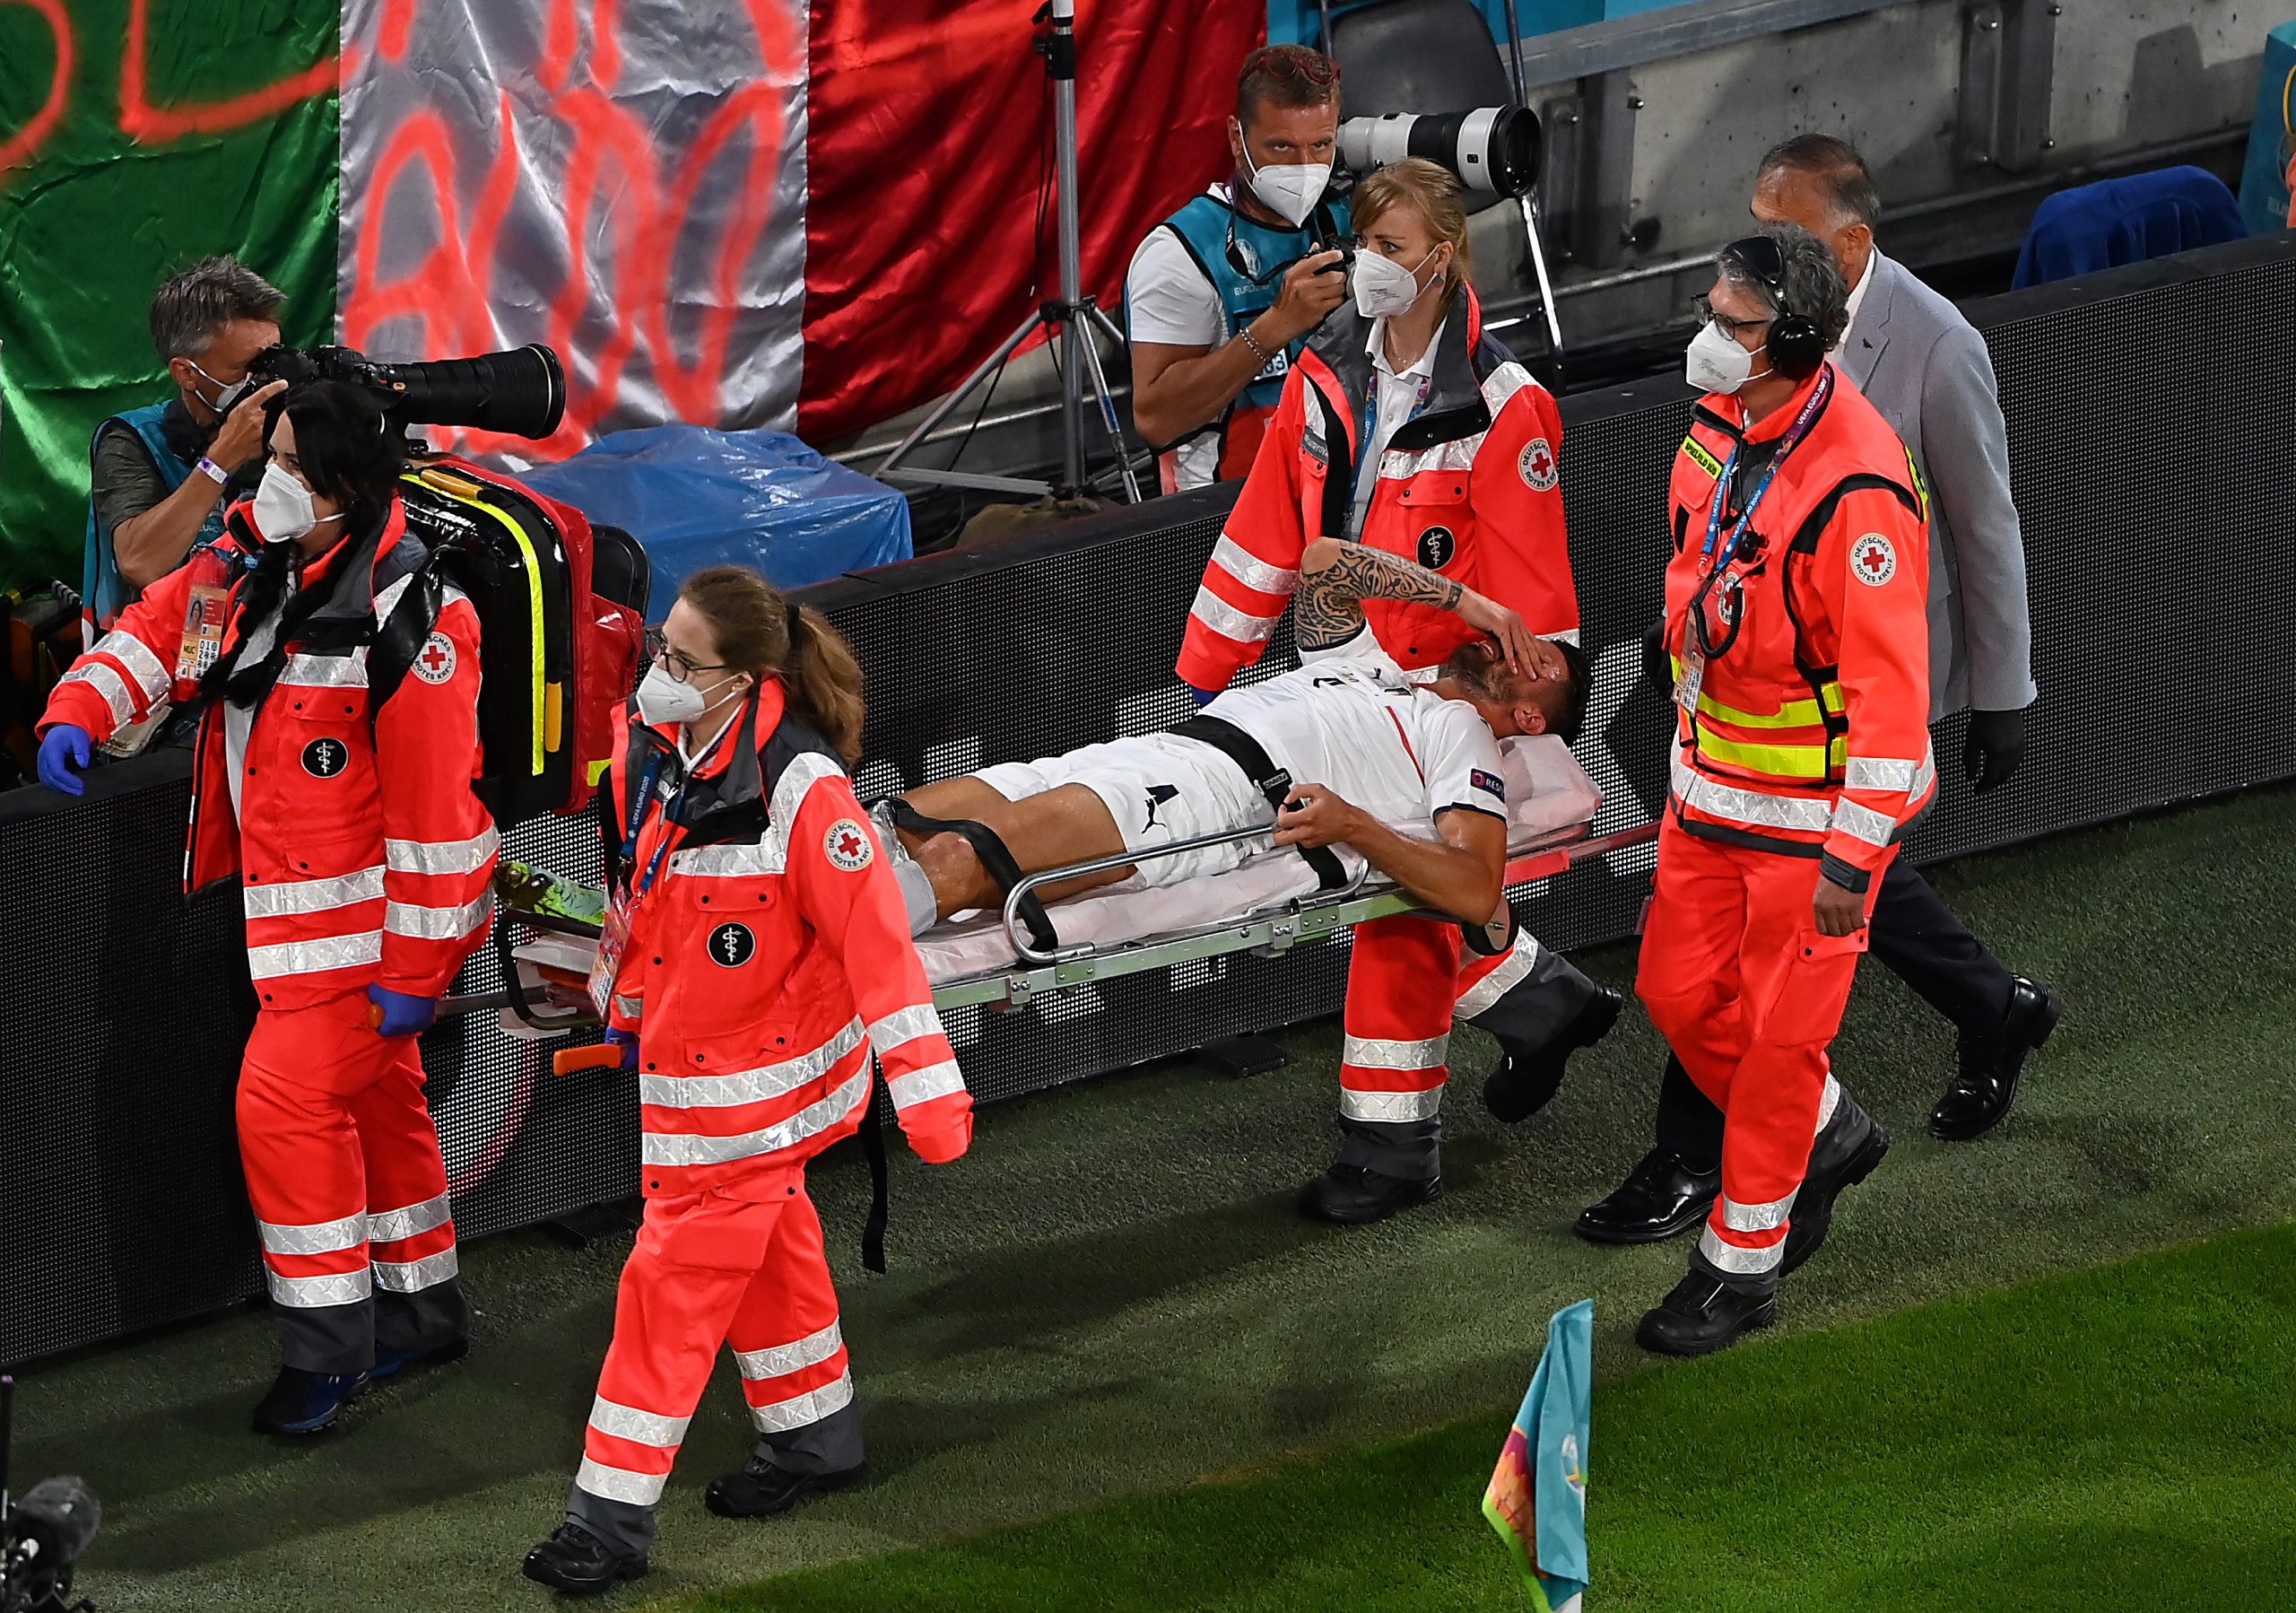 epa09319247 Leonardo Spinazzola of Italy is carried out of the pitch on a stretcher during the UEFA EURO 2020 quarter final match between Belgium and Italy in Munich, Germany, 02 July 2021.  EPA/Stuart Franklin / POOL (RESTRICTIONS: For editorial news reporting purposes only. Images must appear as still images and must not emulate match action video footage. Photographs published in online publications shall have an interval of at least 20 seconds between the posting.)